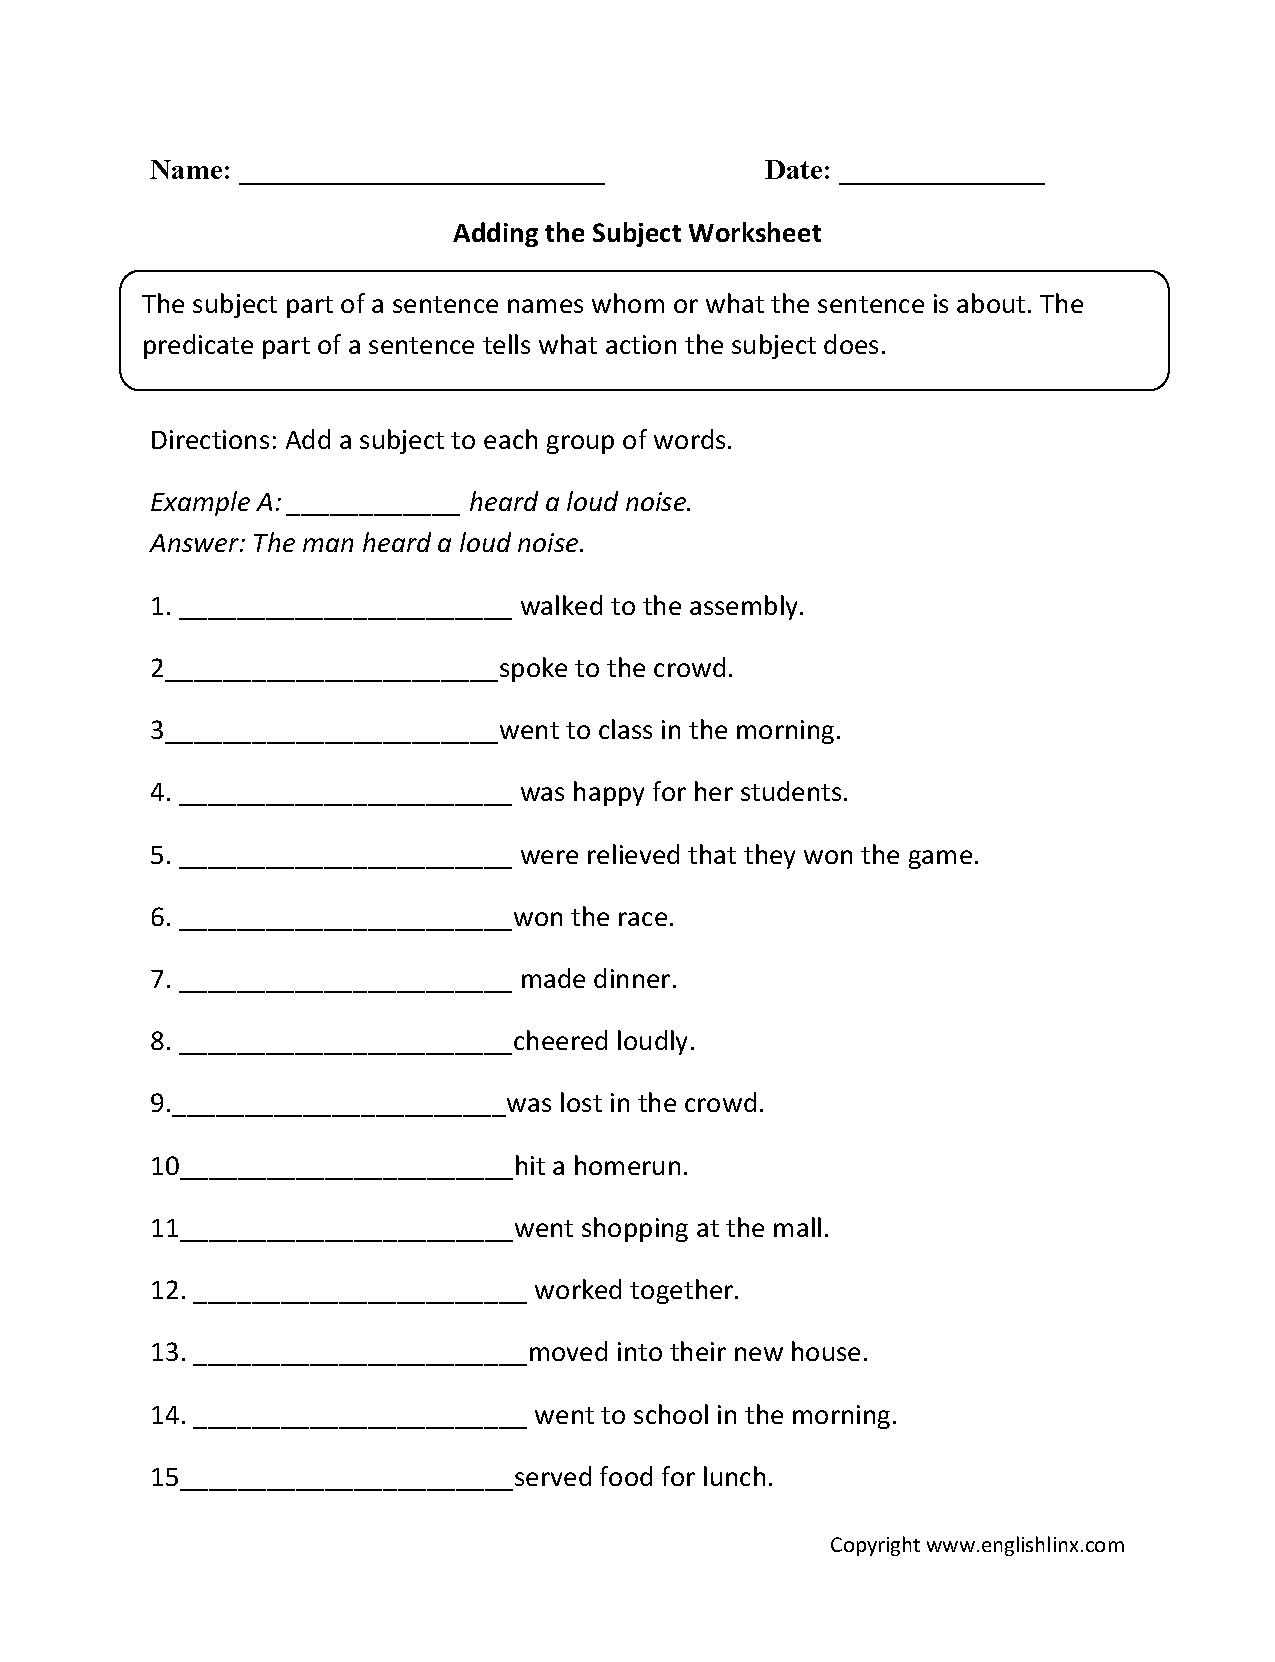 Subject Worksheets 2nd Grade Image